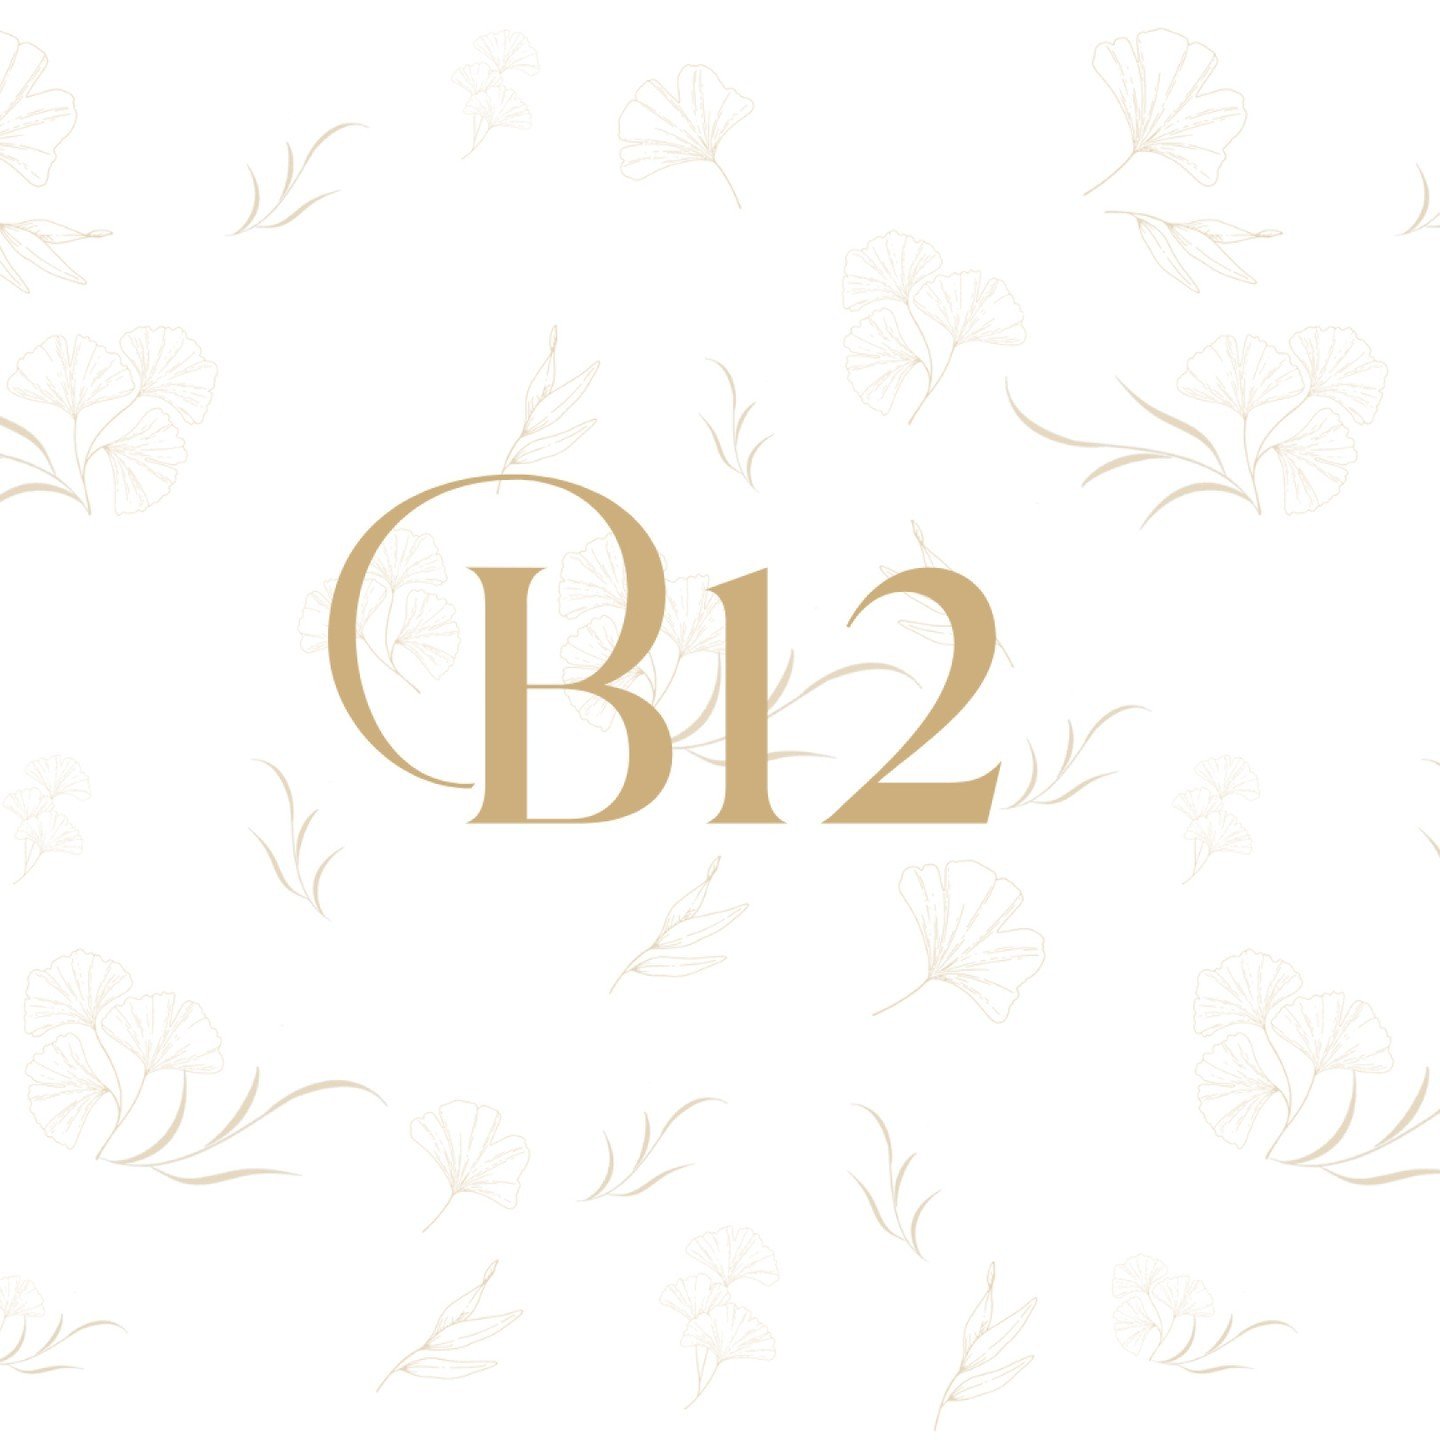 If you're experiencing fatigue, mood changes, or just need an energy boost, B12 could be perfect for you.

💫 Starting at just $45 (plus tax), boost your wellness with our B12 injections! 💉

Vitamin B12 is crucial for breaking down fats and proteins